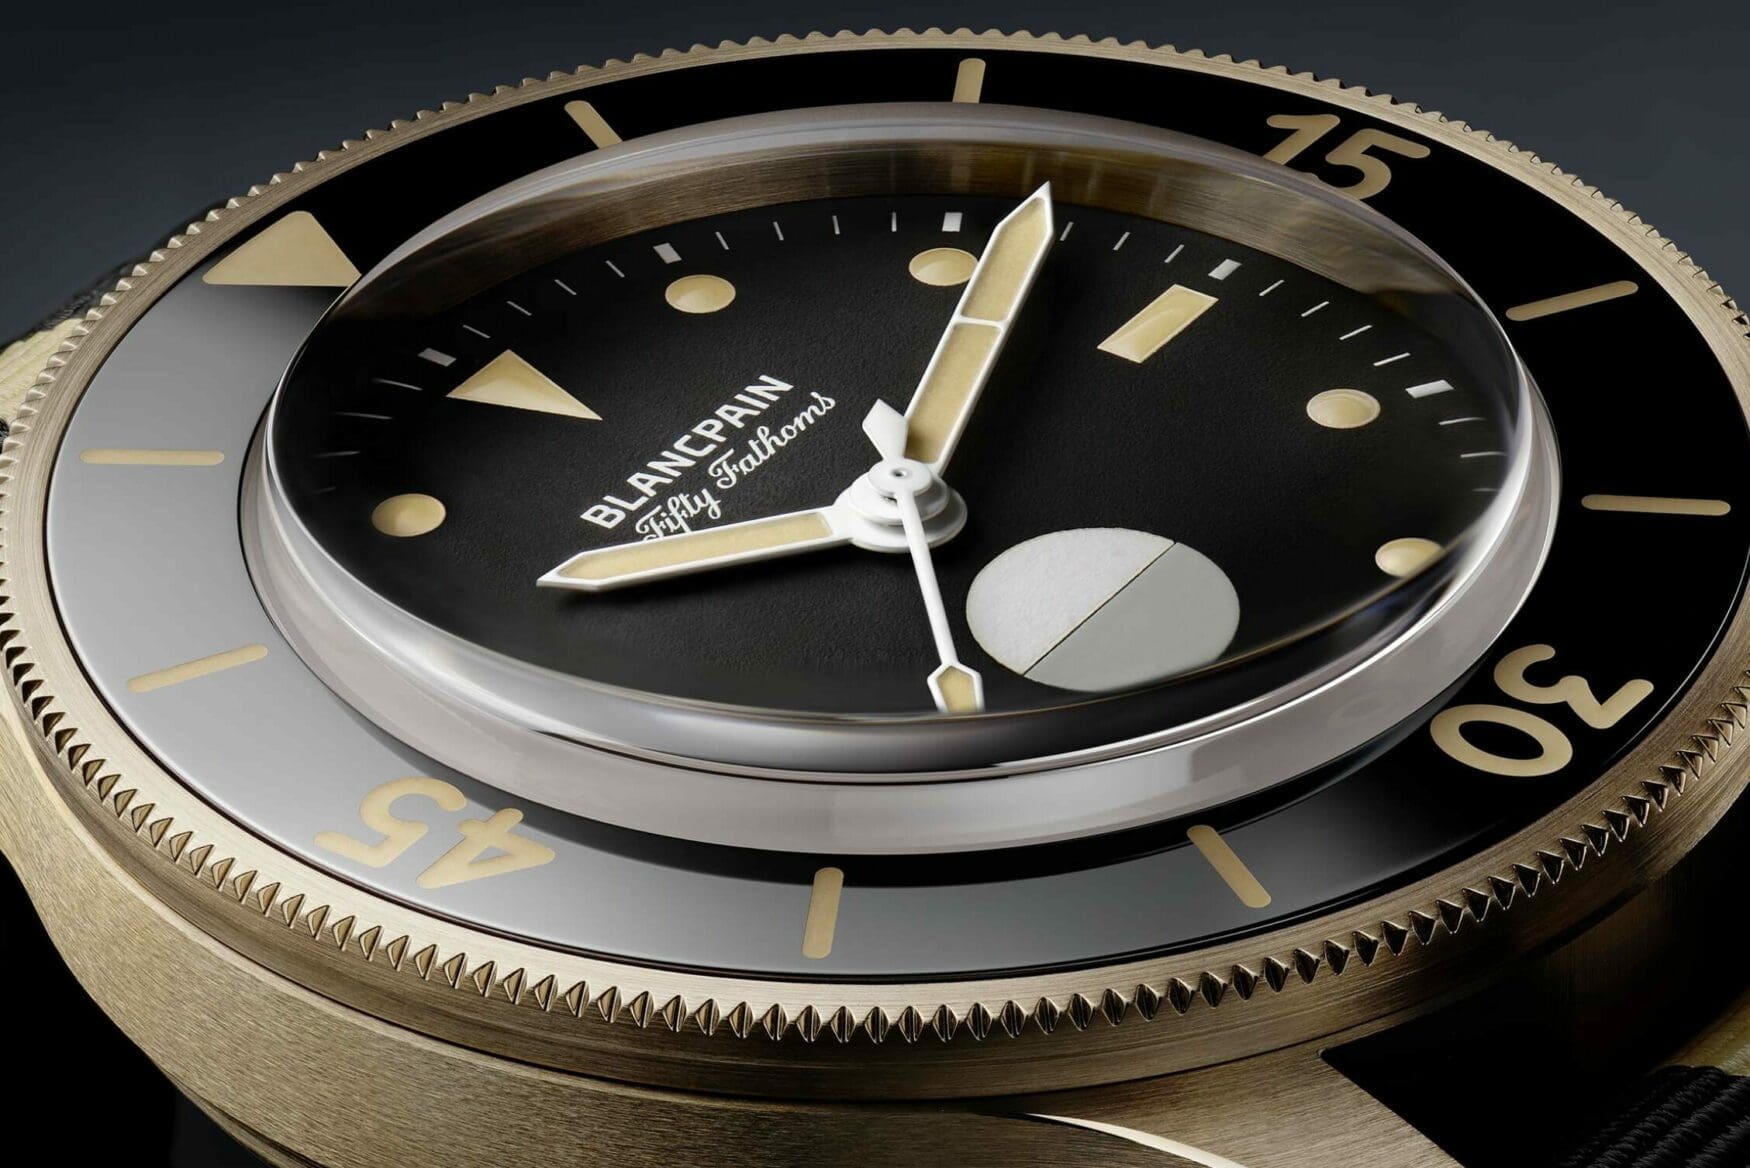 Blancpain Fifty Fathoms 70th Anniversary Act 3 feature